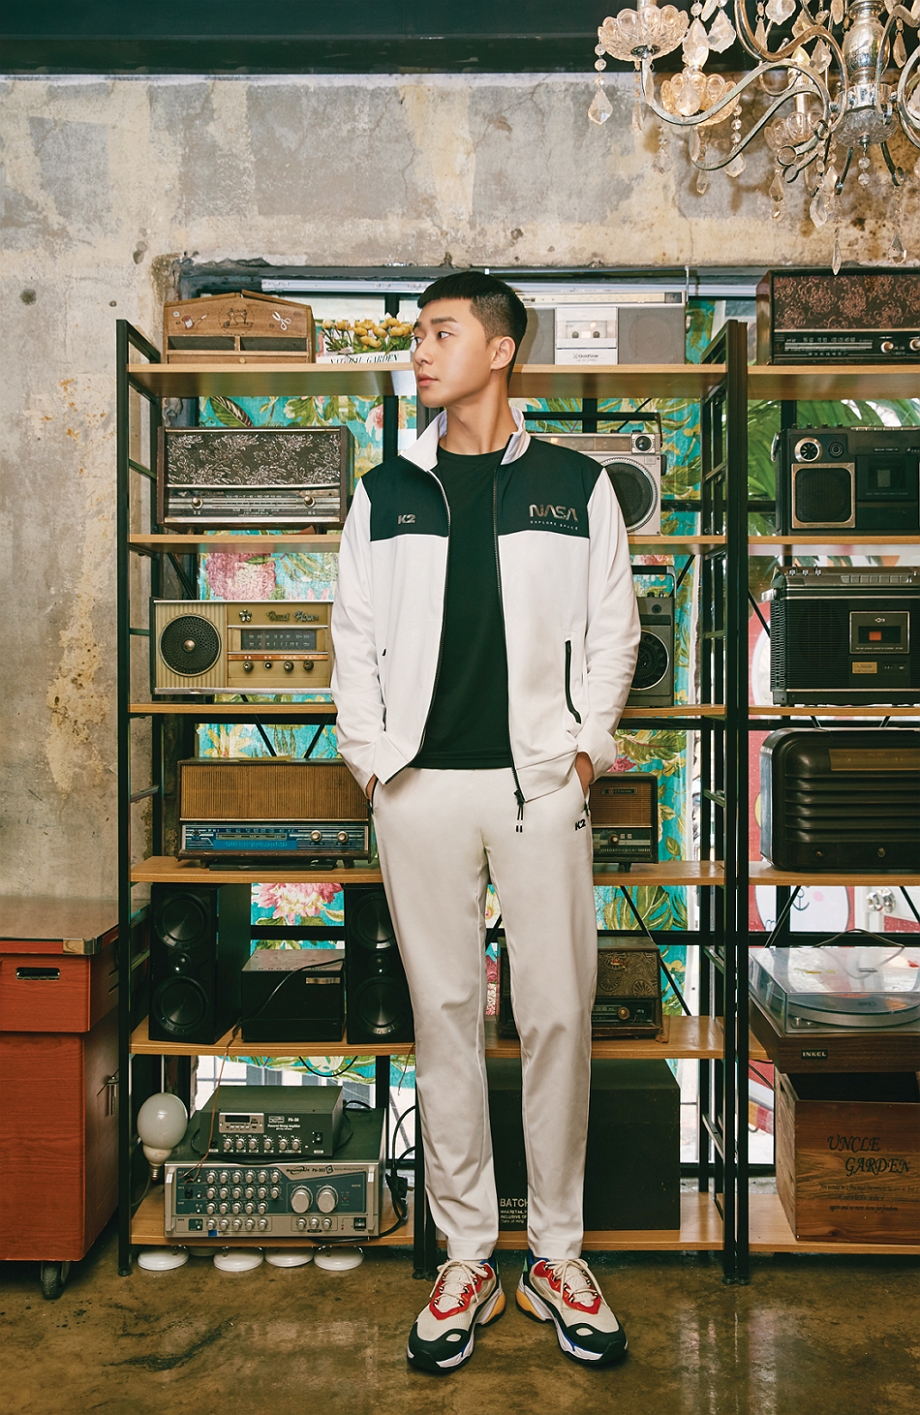 A fashion picture of Actor Park Seo-joon has been released.On the 19th, Outdoor Research brand K2 showed the Outdoor Research picture in spring and summer season with the exclusive model Park Seo-joon.K2 will showcase its sensual Outdoor Research look, which is free of styling in urban and everyday life as well as Outdoor Research for the 2020 S/S season.In this picture, Park Seo-joon proposed styling that can be fashionably produced in everyday life such as jogger pants on white windshield, slim fit outdoor research pants like slacks, functional windshield denim pants.K2s 2020 S/S collection consisted of two lines.Tech Plus Line, which consists of alpine products for hiking experts and products for light hiking, and Life Plus Line, which can be worn casually in everyday life and travel destinations.Meanwhile, K2 will expand its eco-friendly products, which were existing at 3%.Starting this year, we will visit consumers with BLUE TREE, an eco-friendly product group using recycle materials extracted from waste pet bottles and waste nets, dry die technology that does not use water and chemicals at all, and biodegradation One.